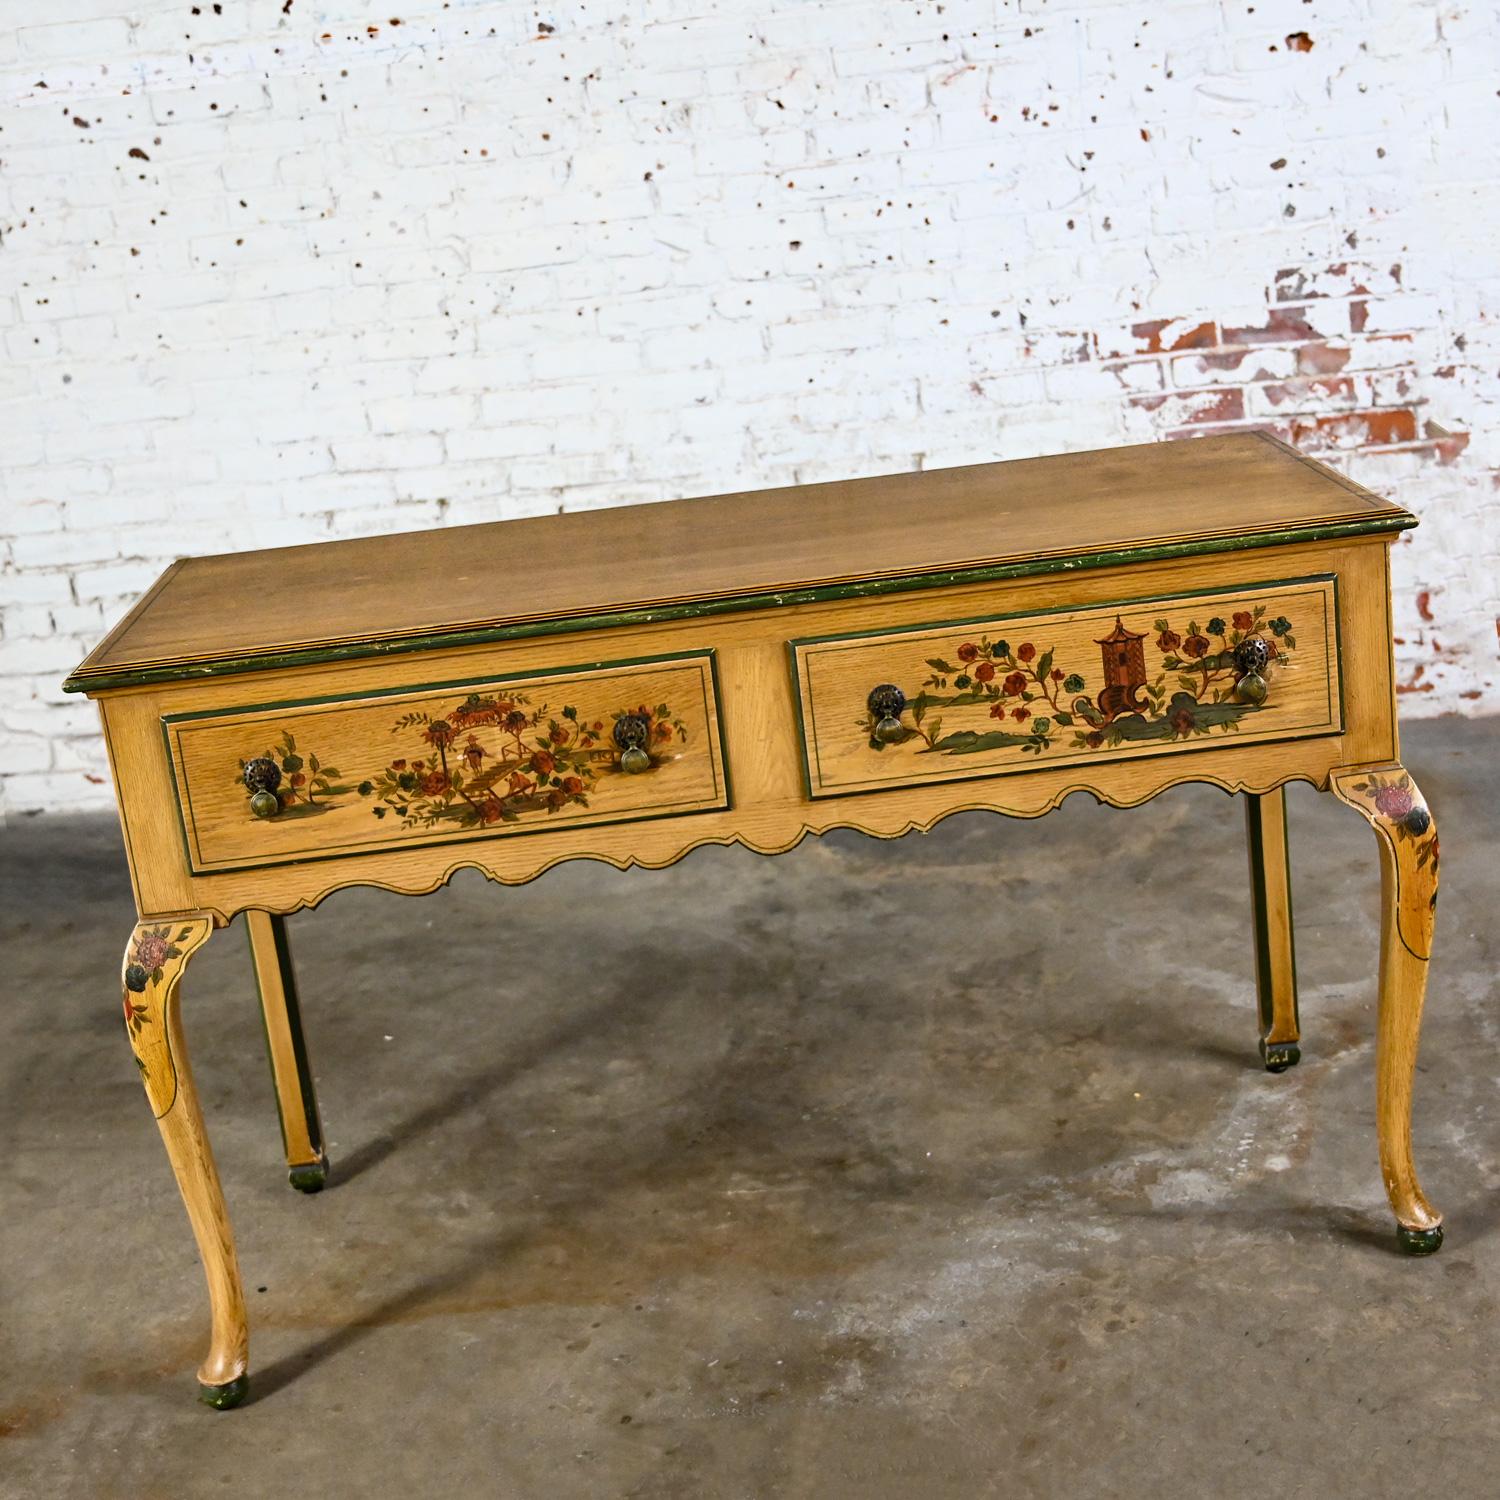 Marvelous Antique Hunt style buffet, sideboard, cabinet, or server comprised of Chinoiserie hand painted details and cabriole legs with ball feet. Beautiful condition, keeping in mind that this is vintage and not new so will have signs of use and